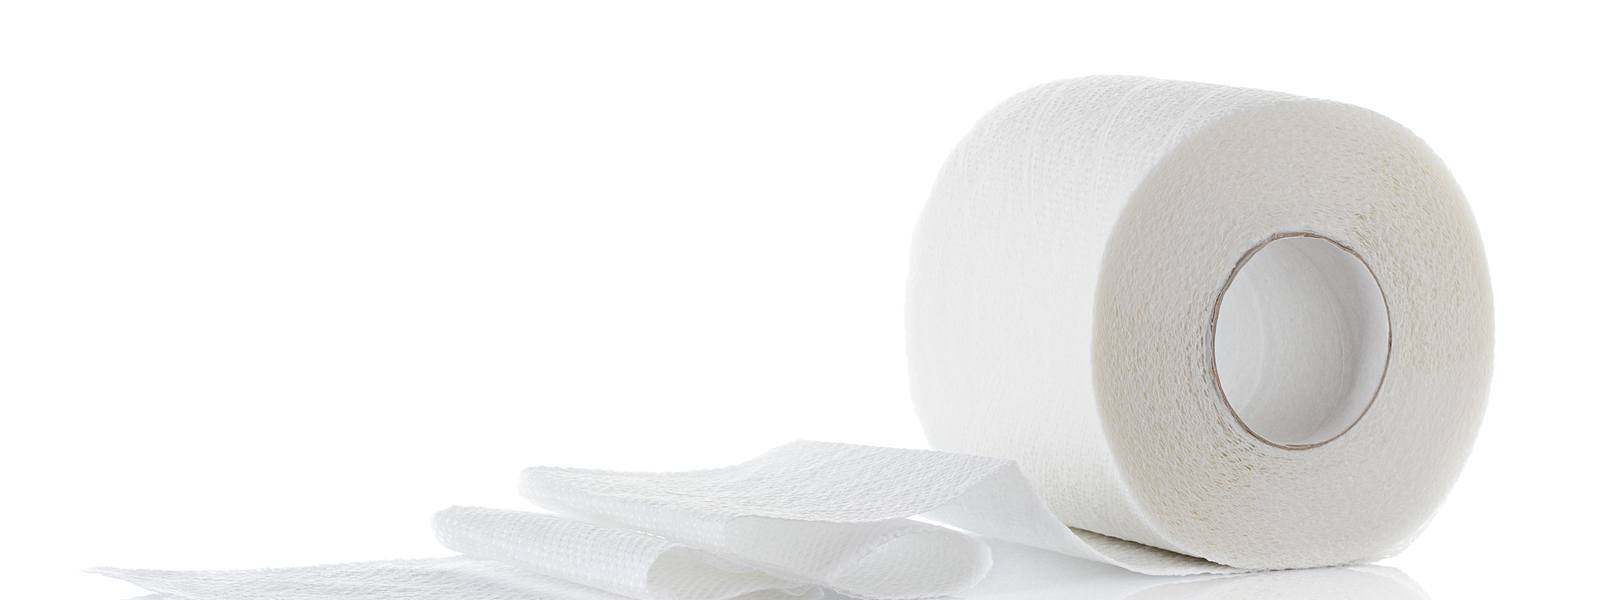 Gross but useful - Scientist are creating electricity from used toilet paper